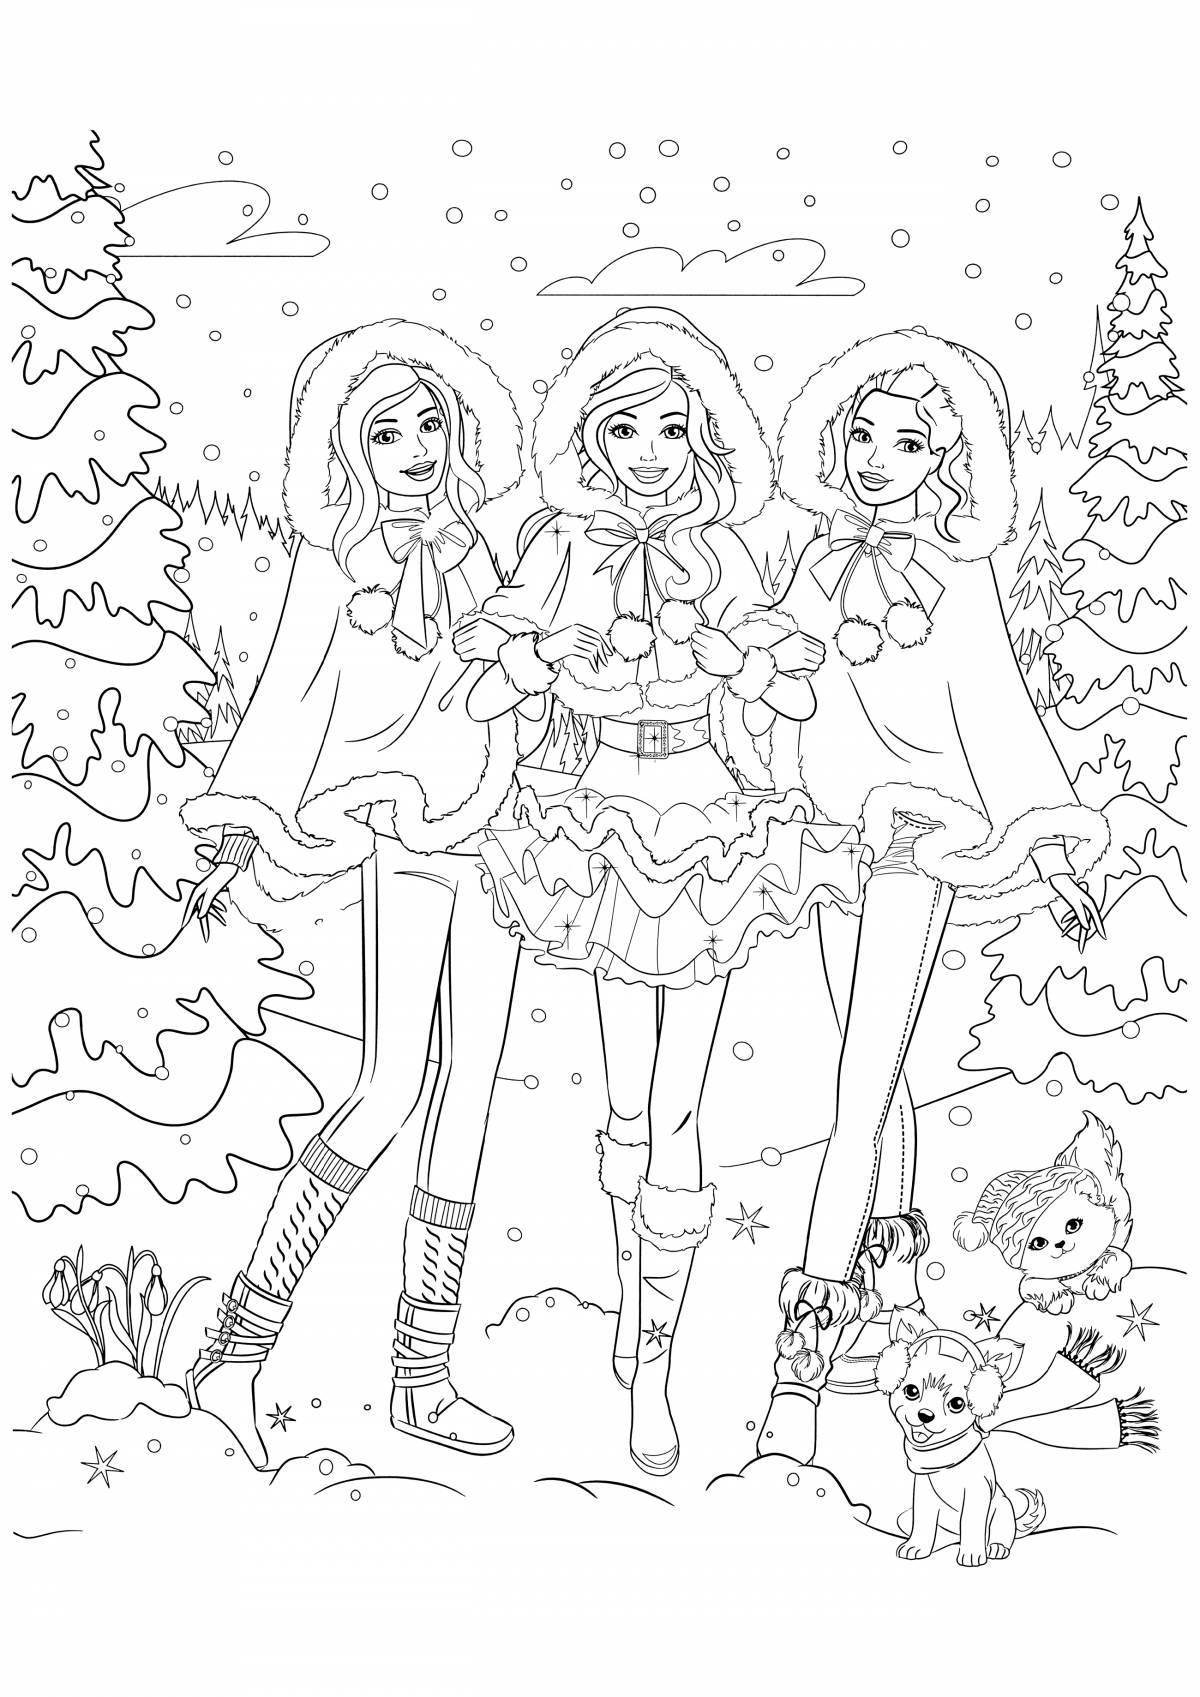 Majestic winter coloring book for girls